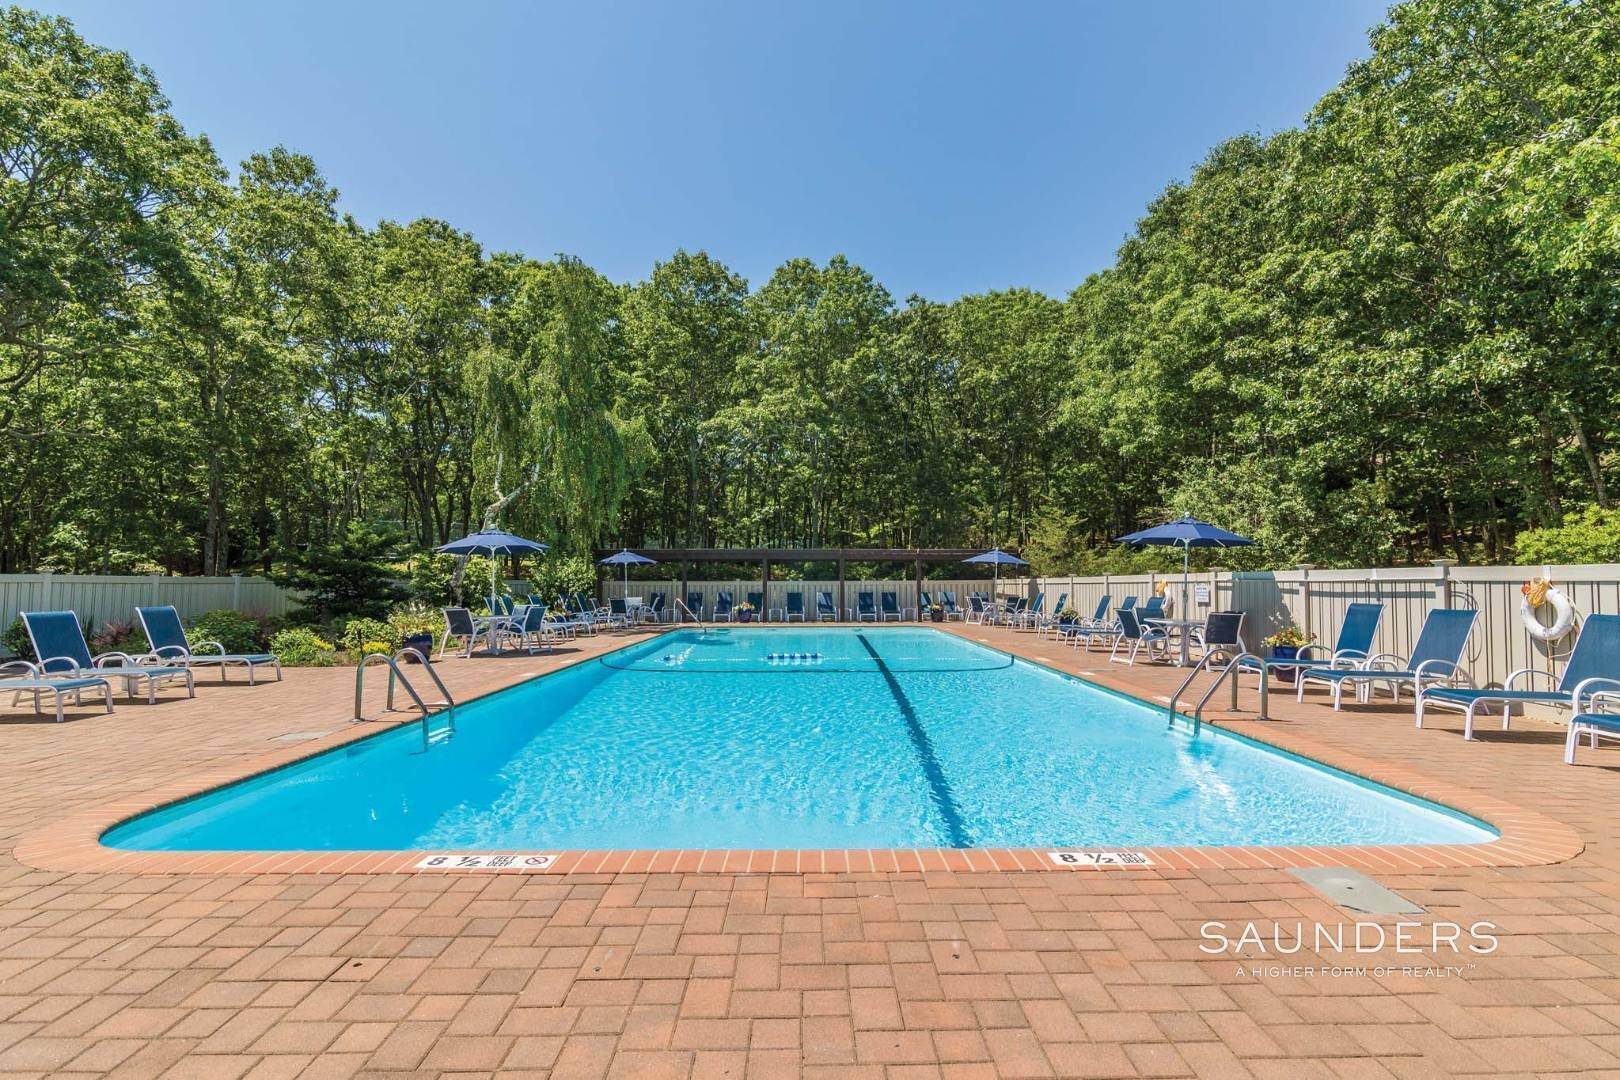 26. Condominiums at Easy Living In A Large 4+ Bed, 3 Bath Condo With Pool & Tennis 202 Treescape Drive, #10b, East Hampton, NY 11937